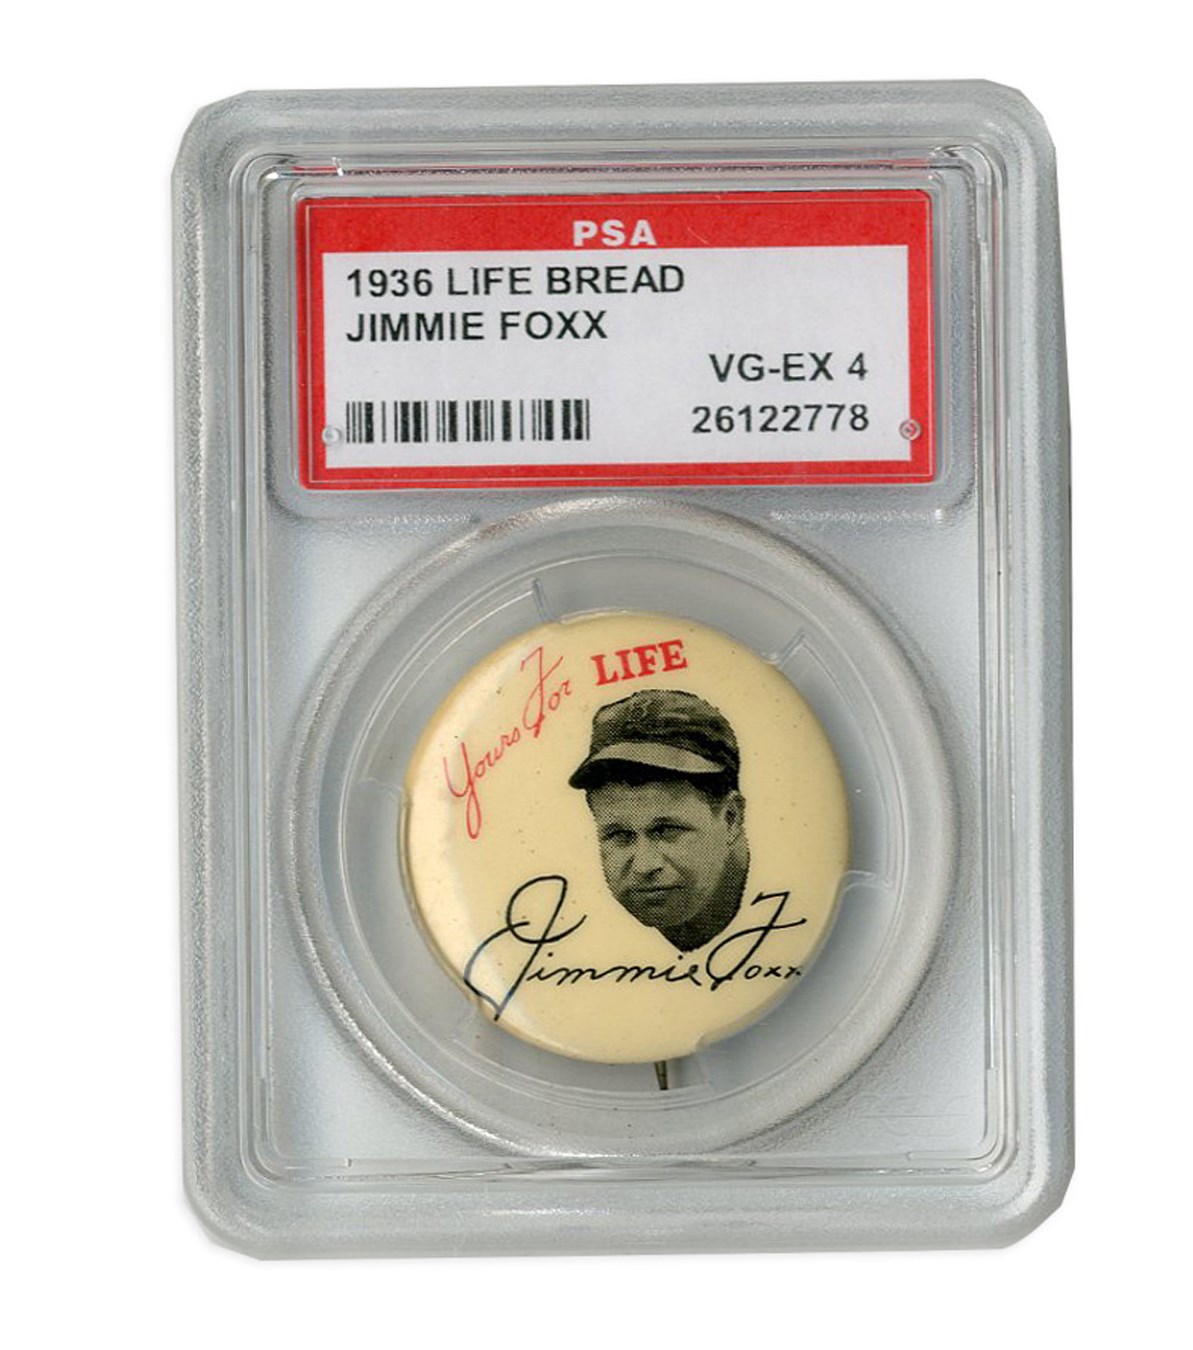 Boston Sports - 1936 Life Bread Jimmie Foxx "Yours For Life" Pin PSA VG-EX 4